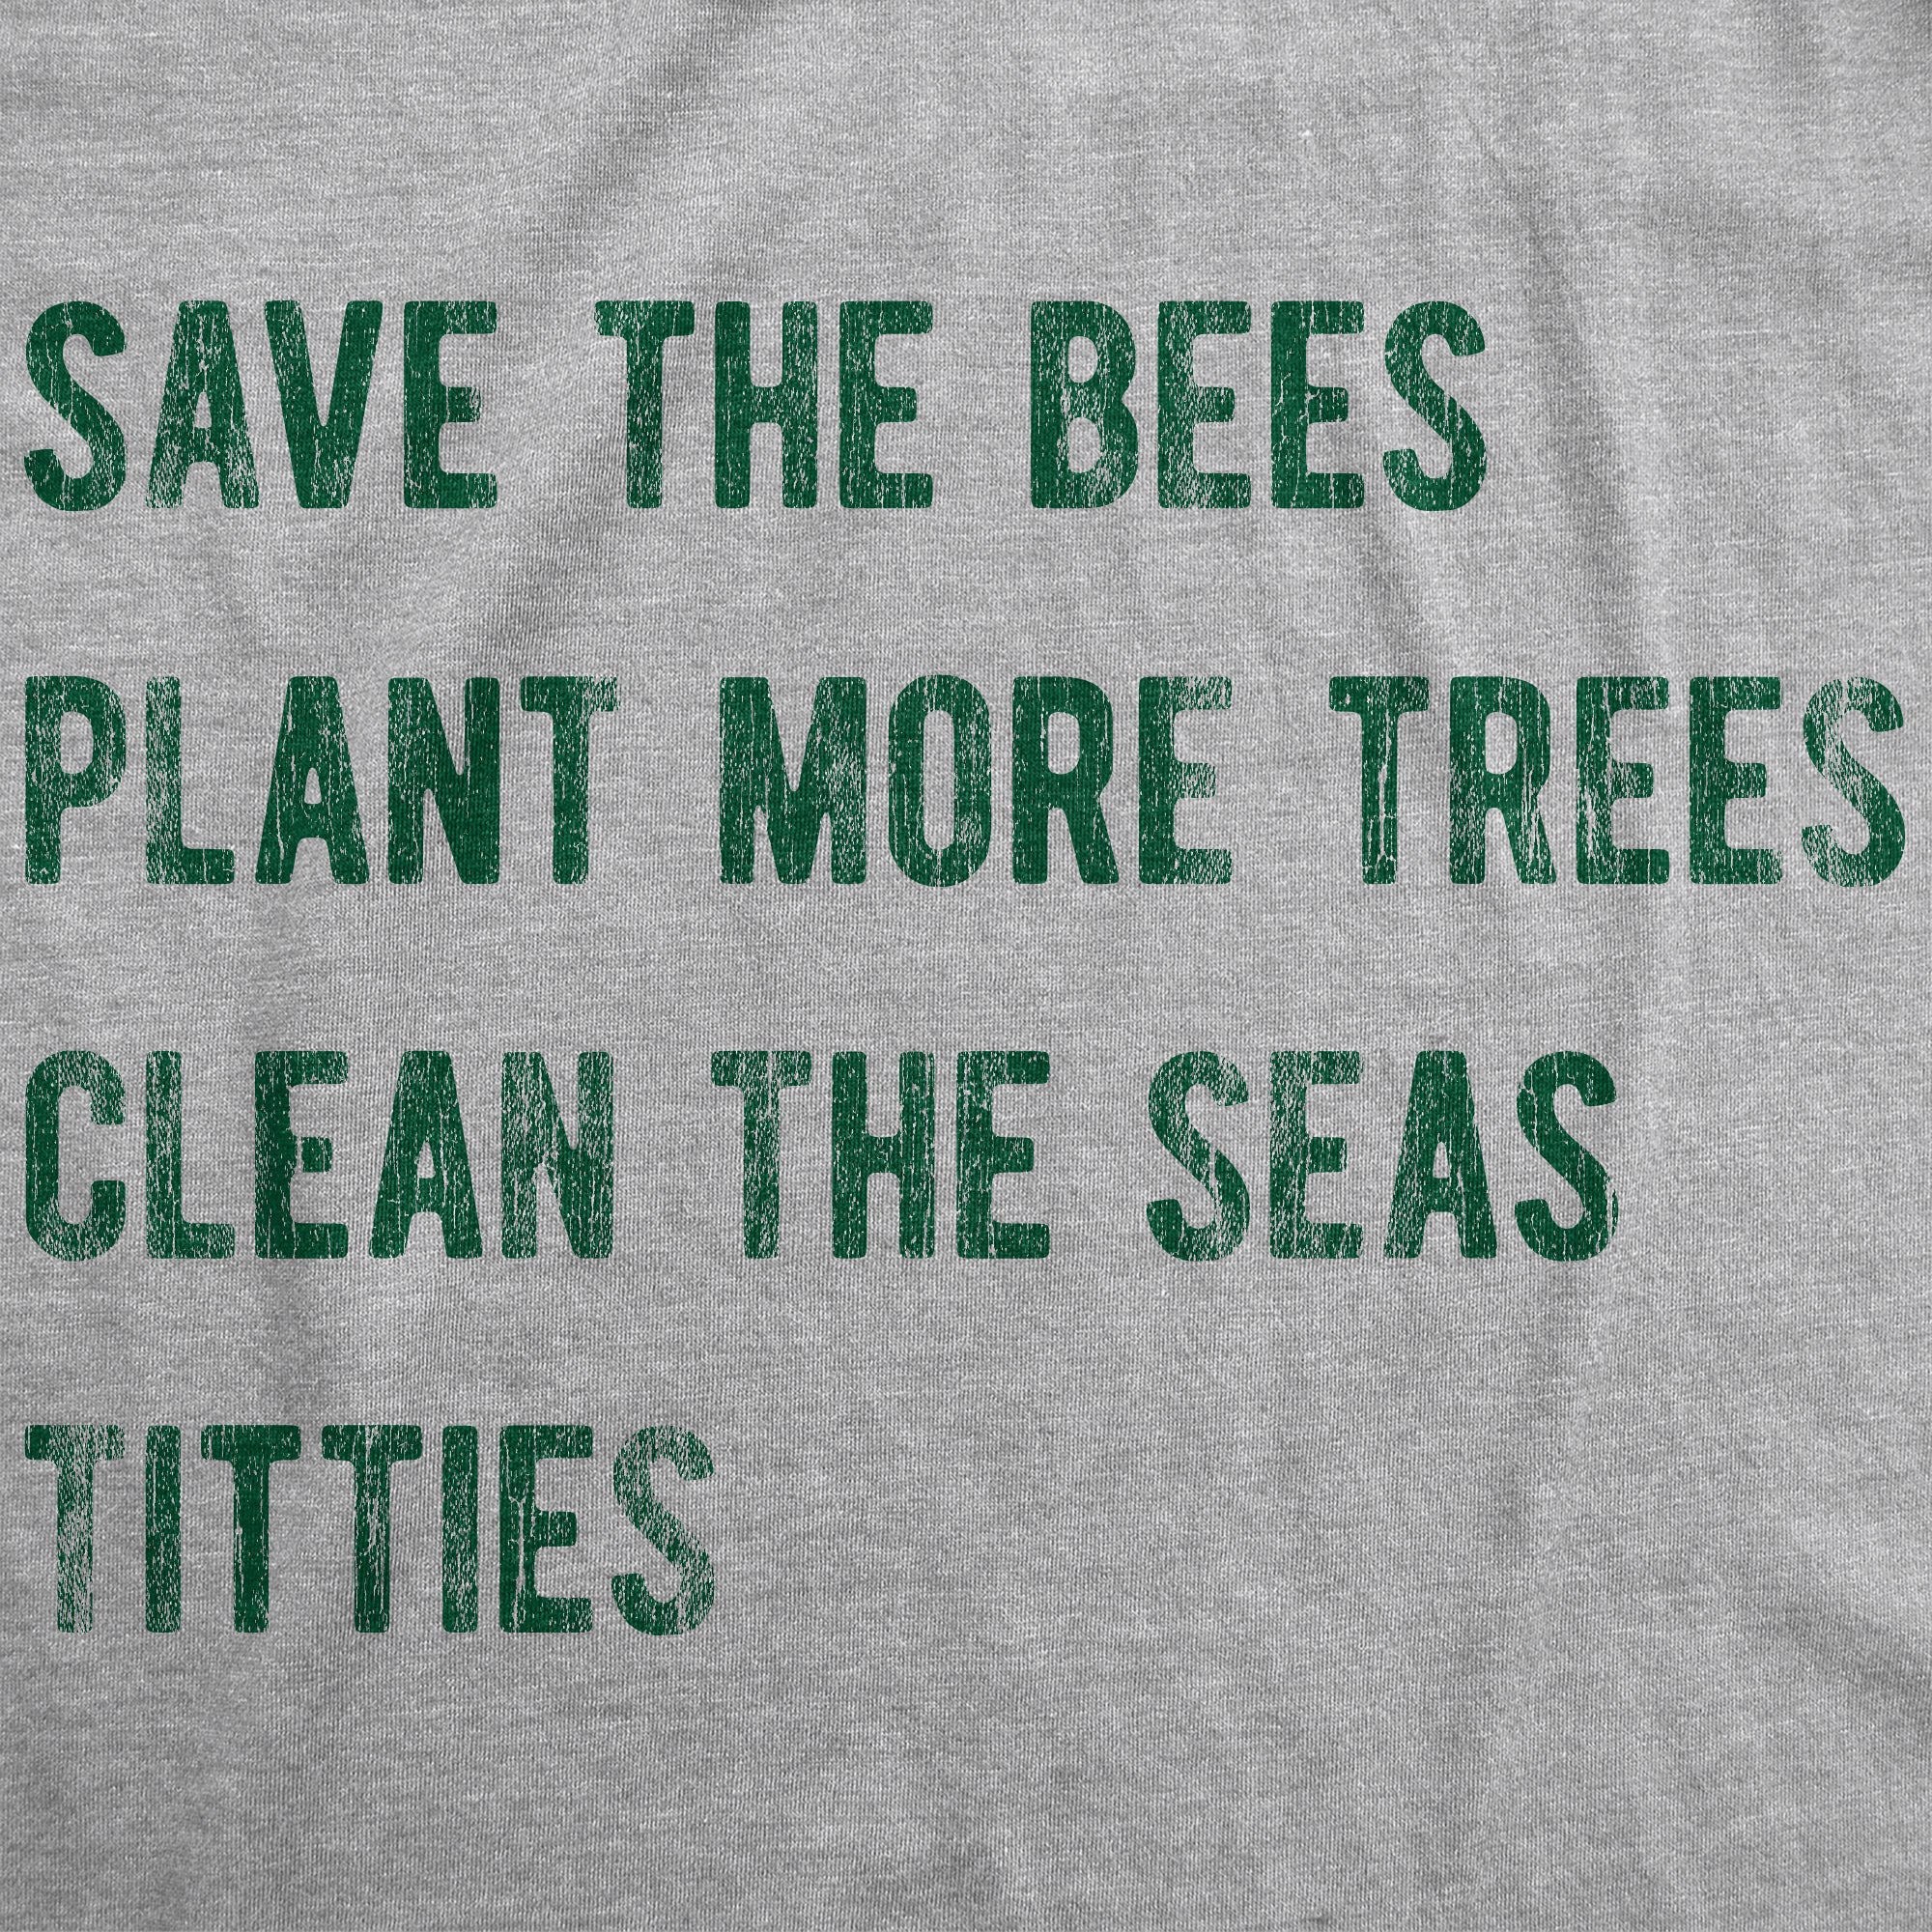 Funny Light Heather Grey - Bees Trees Seas Titties Save The Bees Plant More Trees Clean The Seas Titties Womens T Shirt Nerdy Earth sarcastic Tee